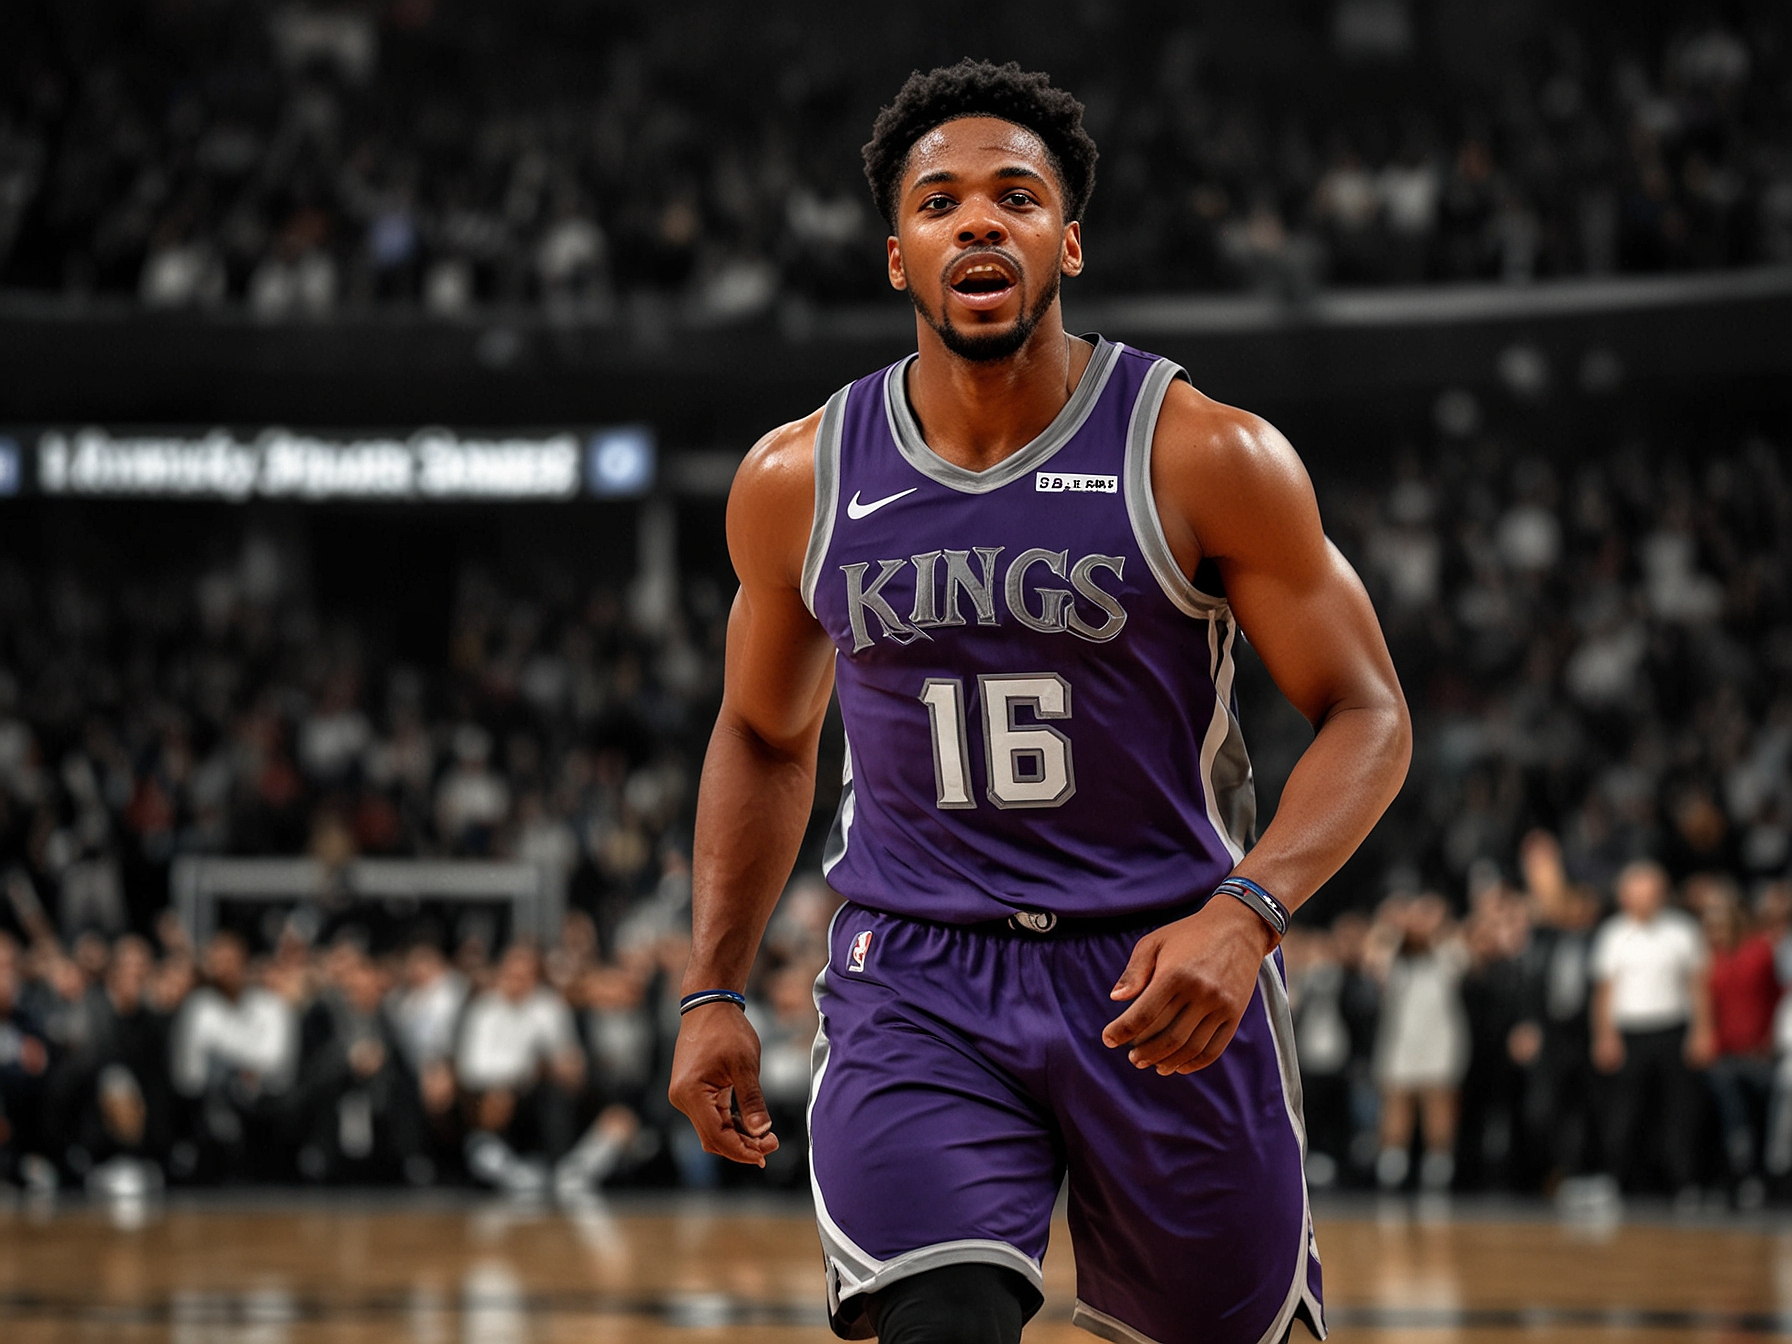 The Kings' Sixth Man of the Year runner-up celebrates after a crucial play, showcasing his dynamic impact coming off the bench. His energy and skill are key to the team's success.